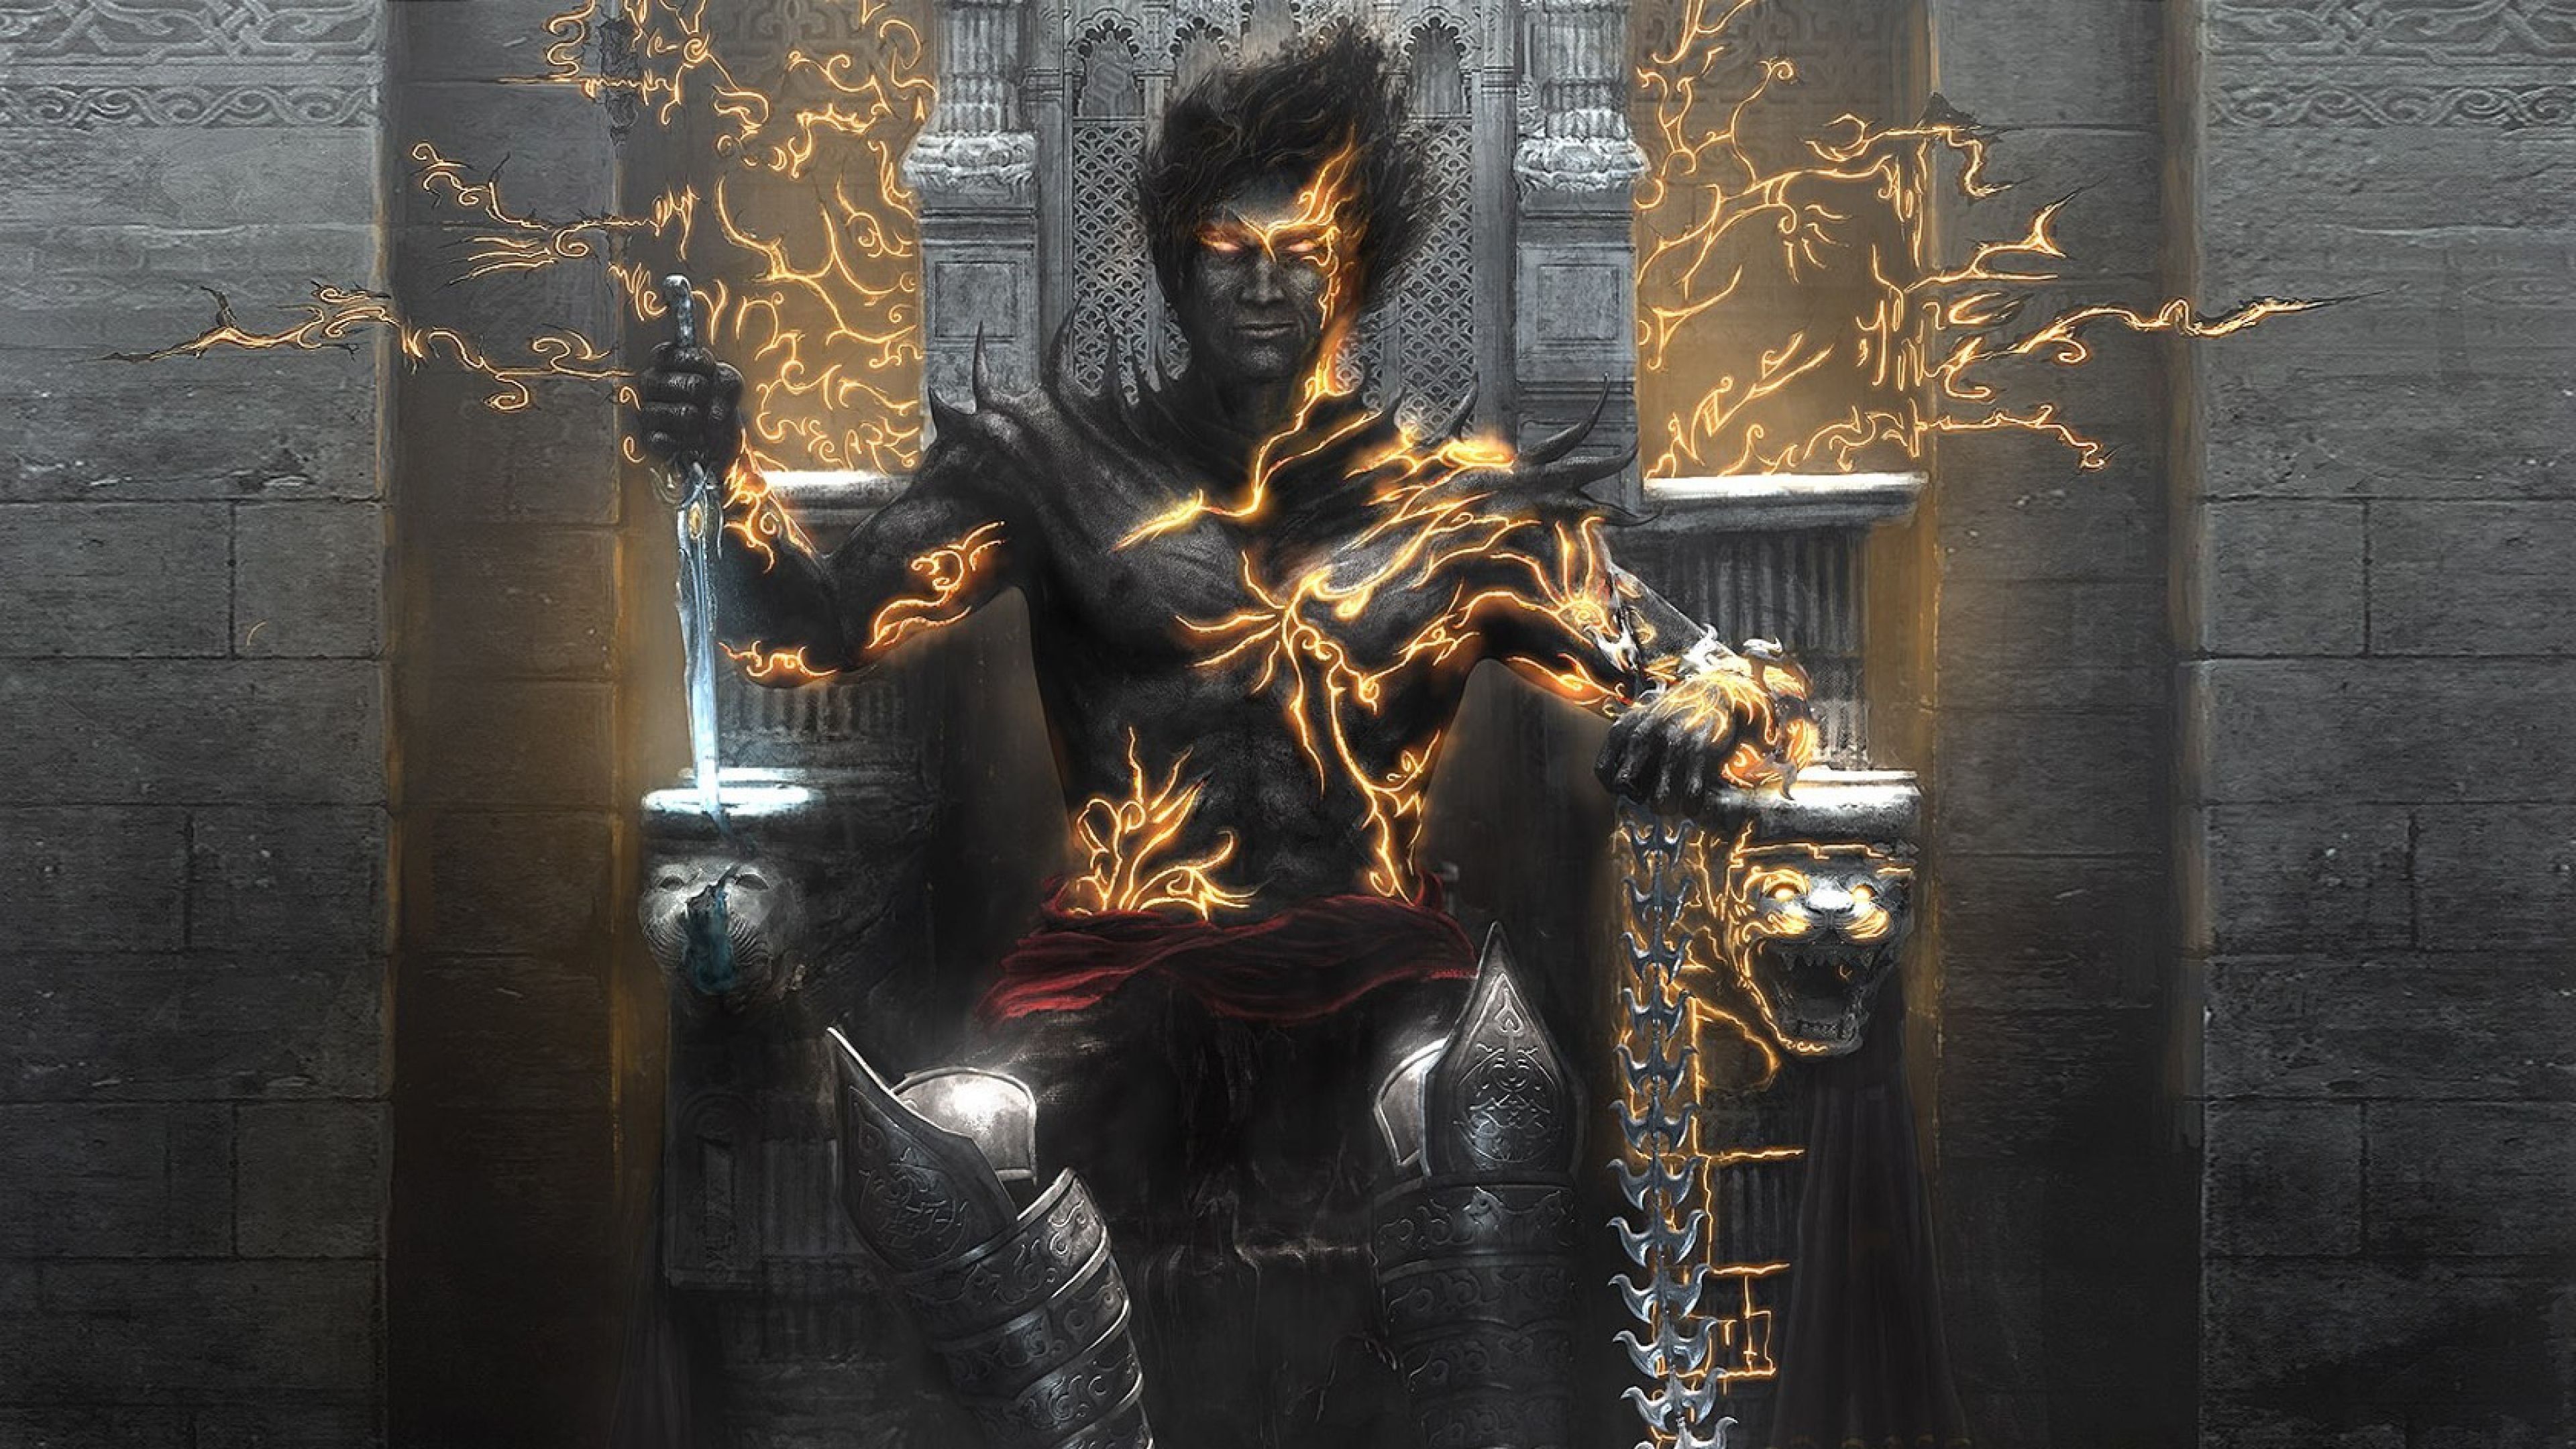 Download Wallpaper 3840x2160 Prince of persia, Knife, Throne